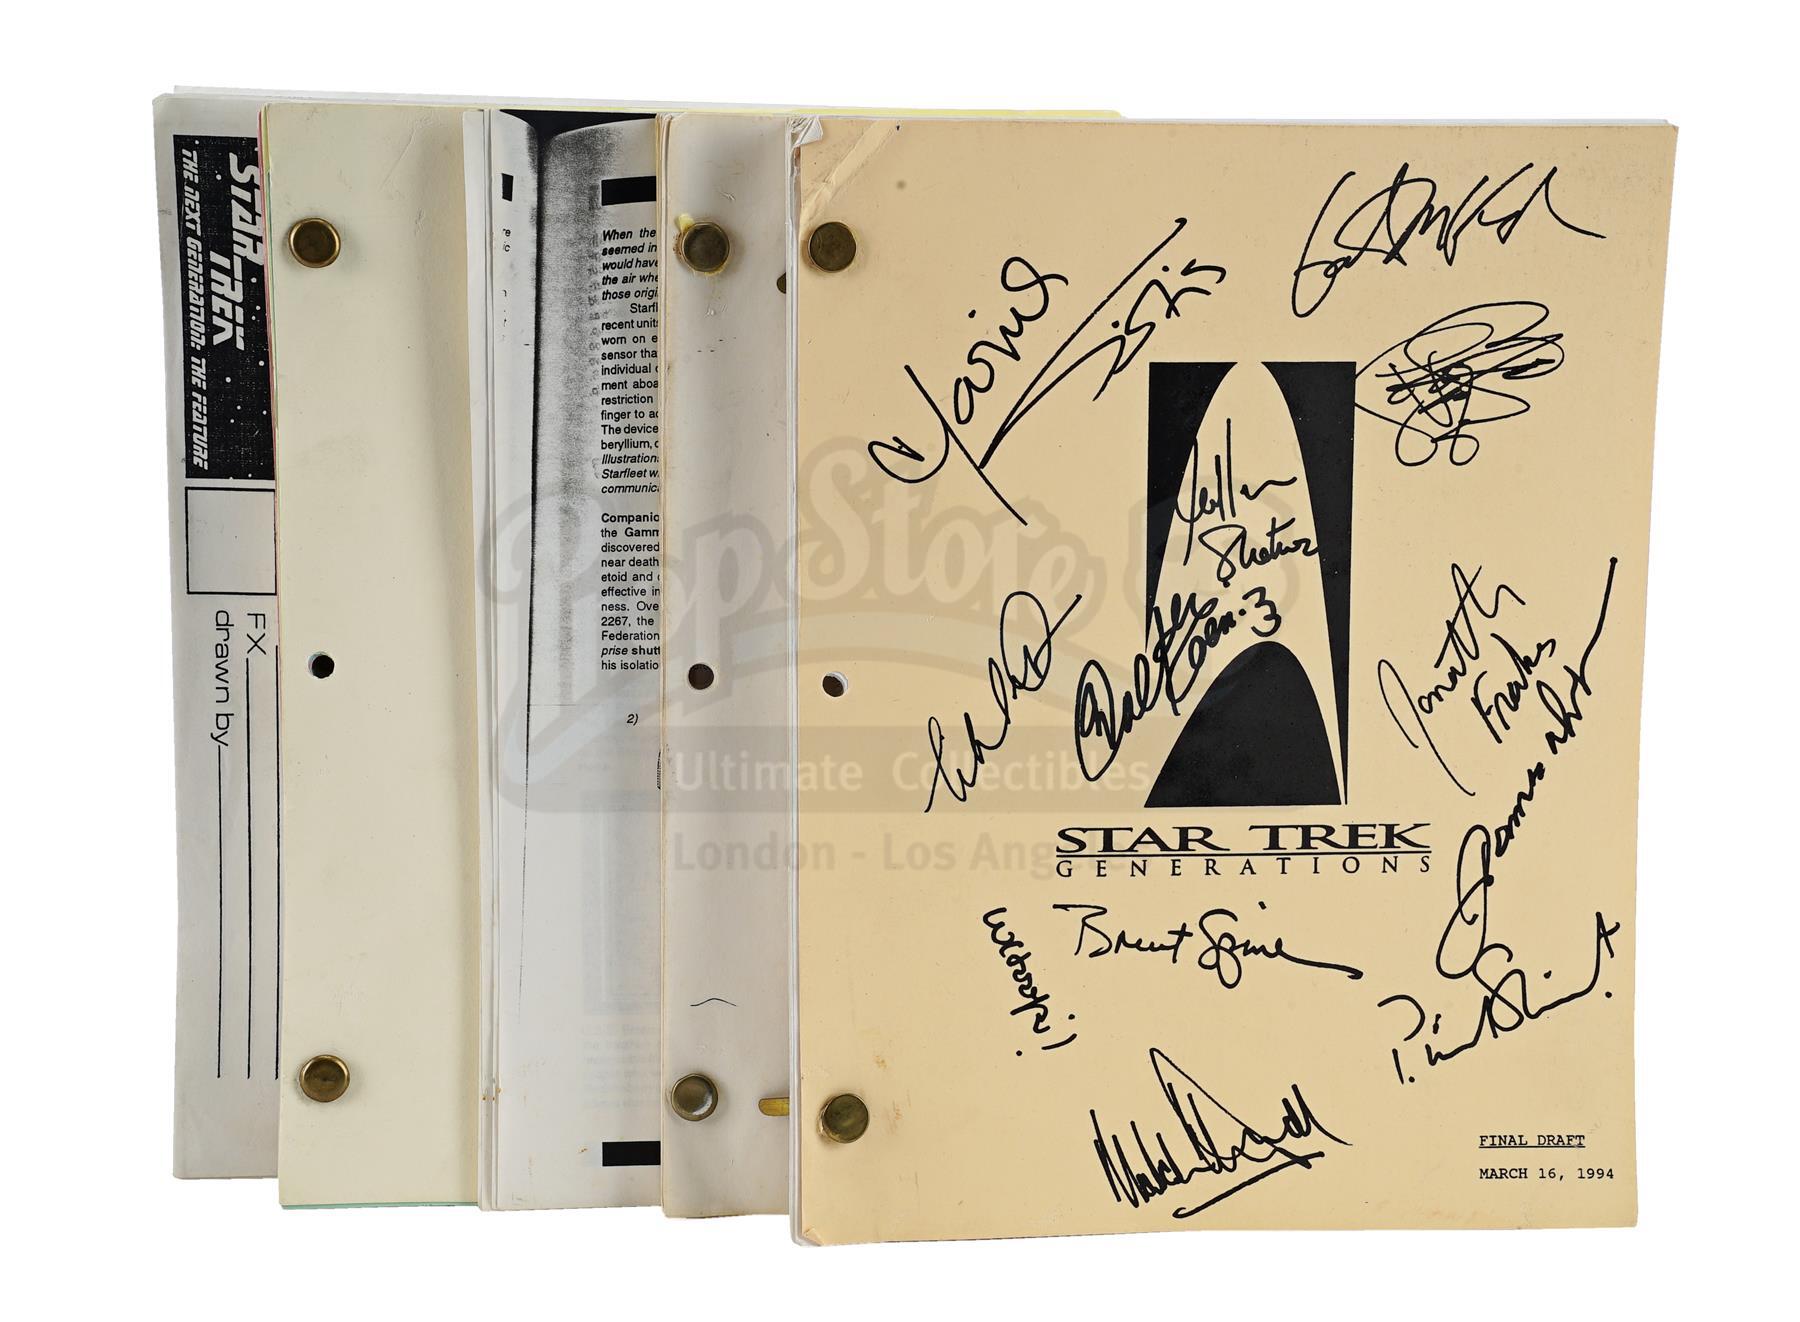 Lot # 1094: STAR TREK: GENERATIONS - Cast-Signed Script, Additional Script, Storyboards, and Writer'